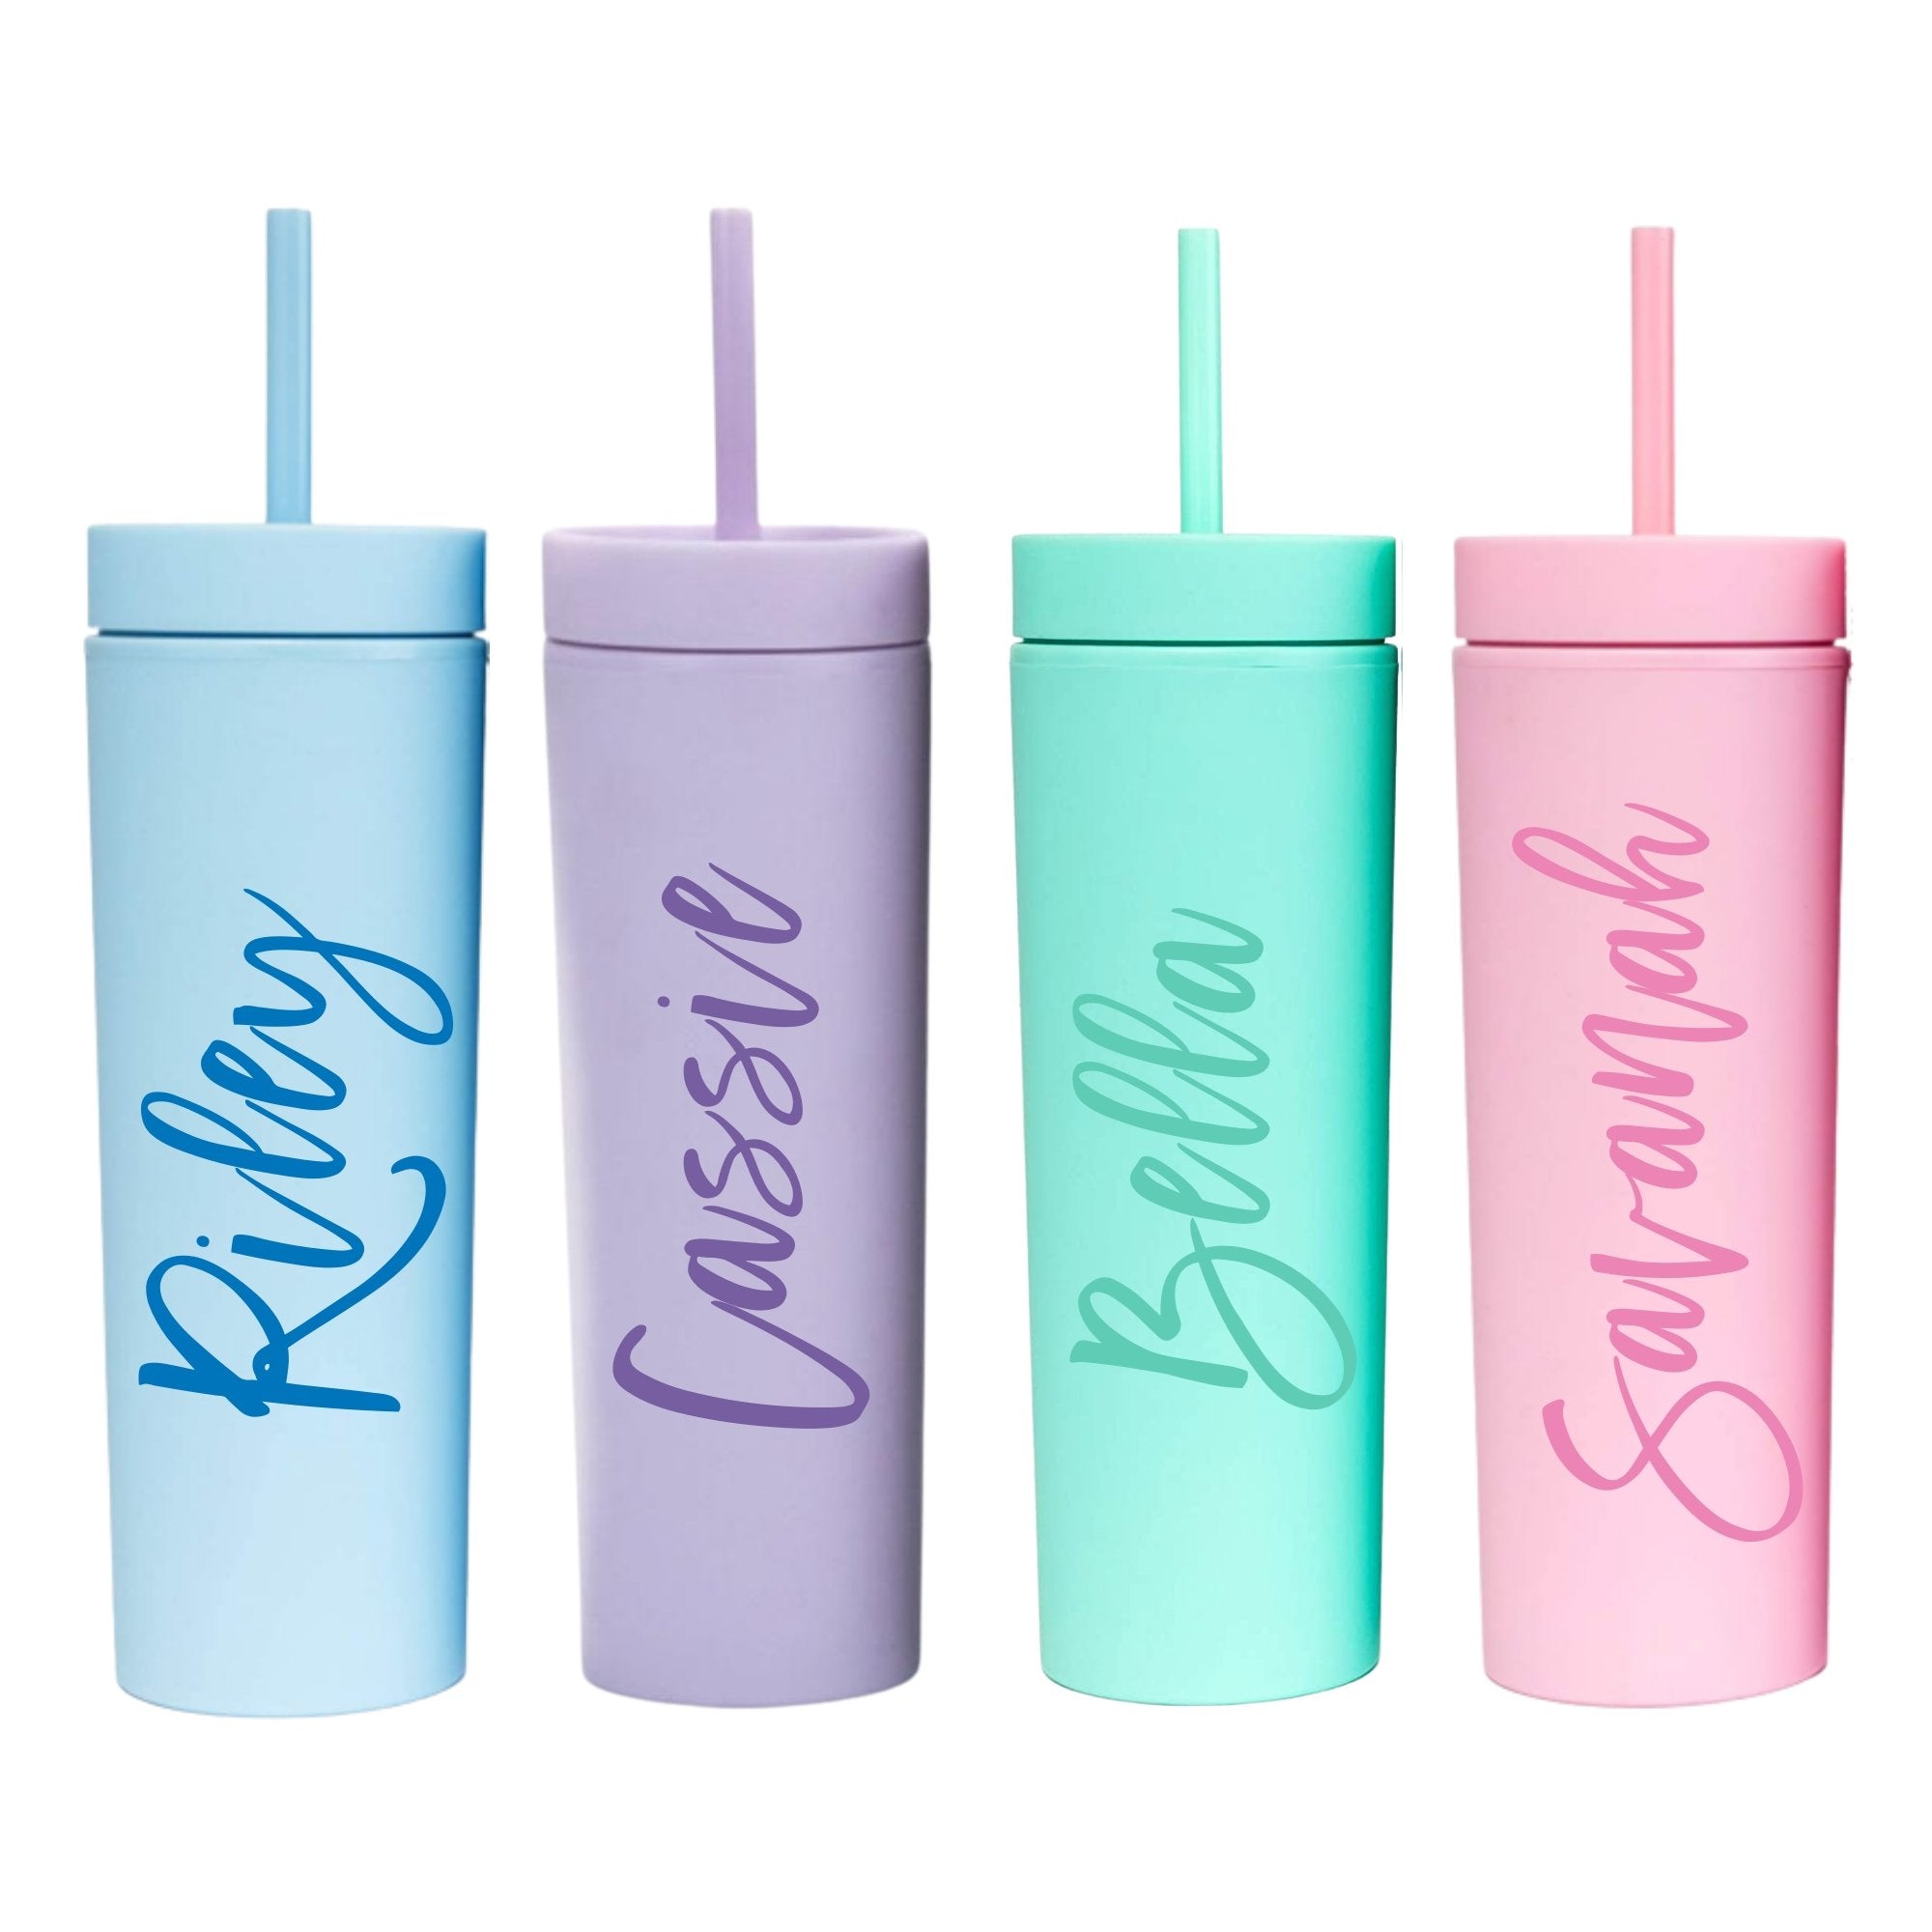 40 oz Tumbler with Monogram Motif - Sprinkled With Pink